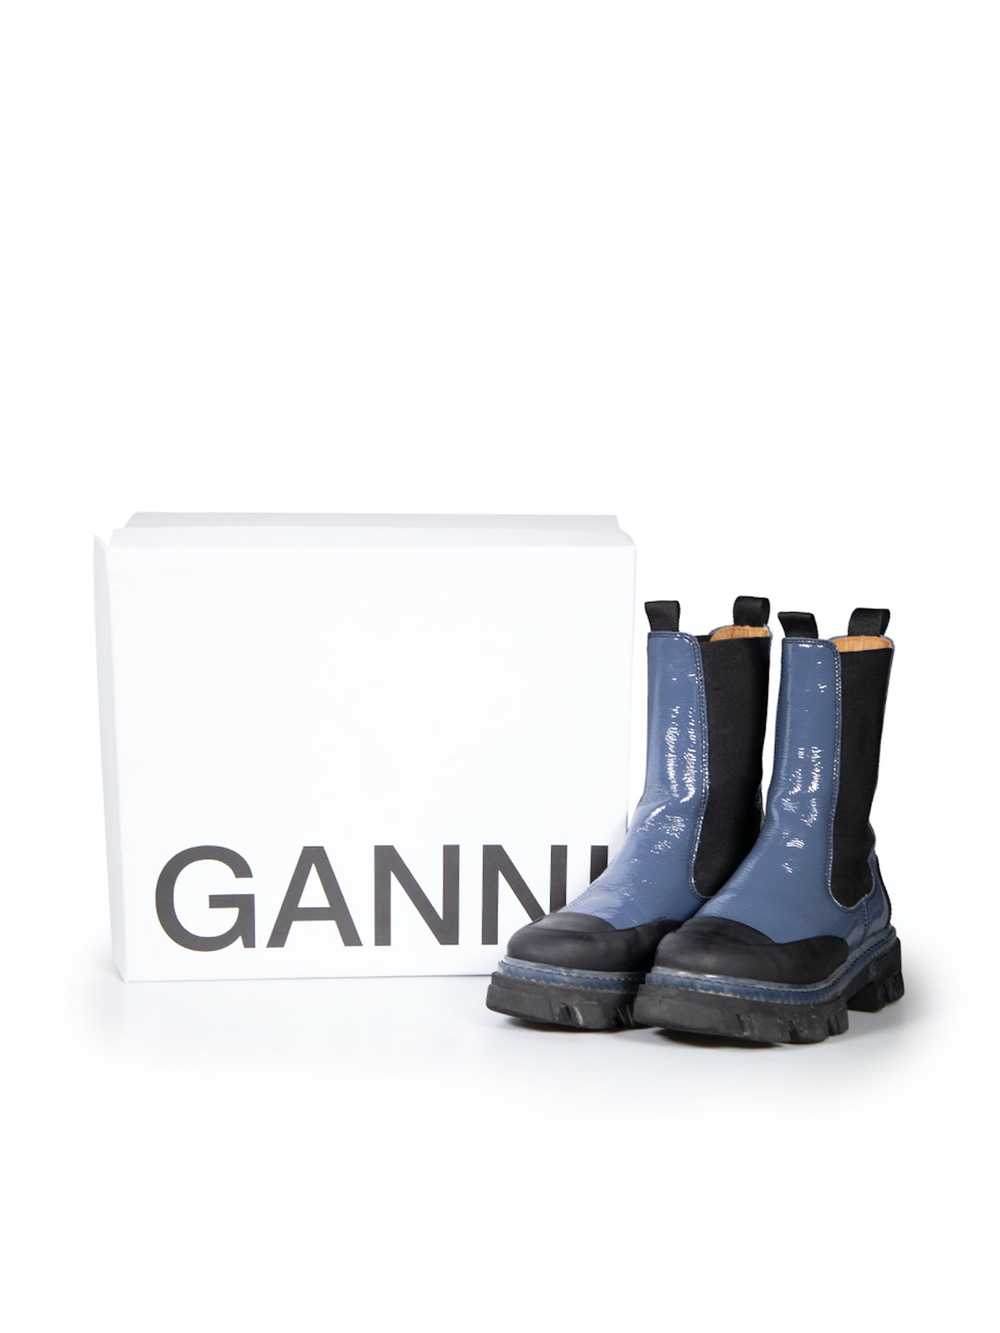 Ganni Blue Patent Leather Mid Chelsea Boots - image 6